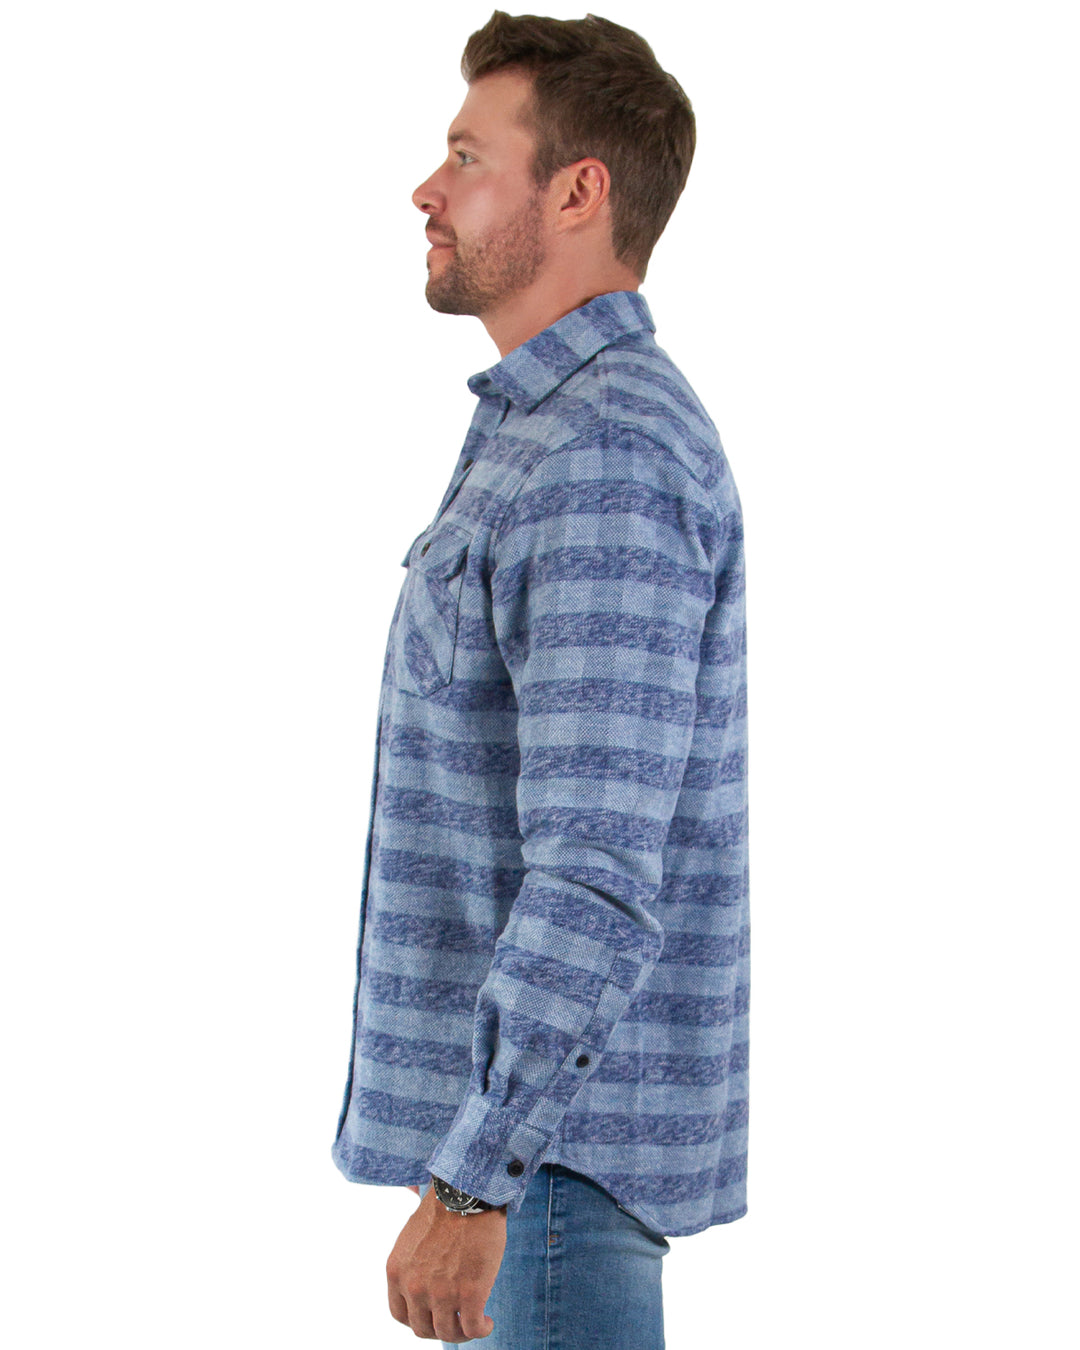 The Grand Flannel, Heavyweight Cotton Flannel Shirt for Men by MuskOx –  MuskOx Flannels